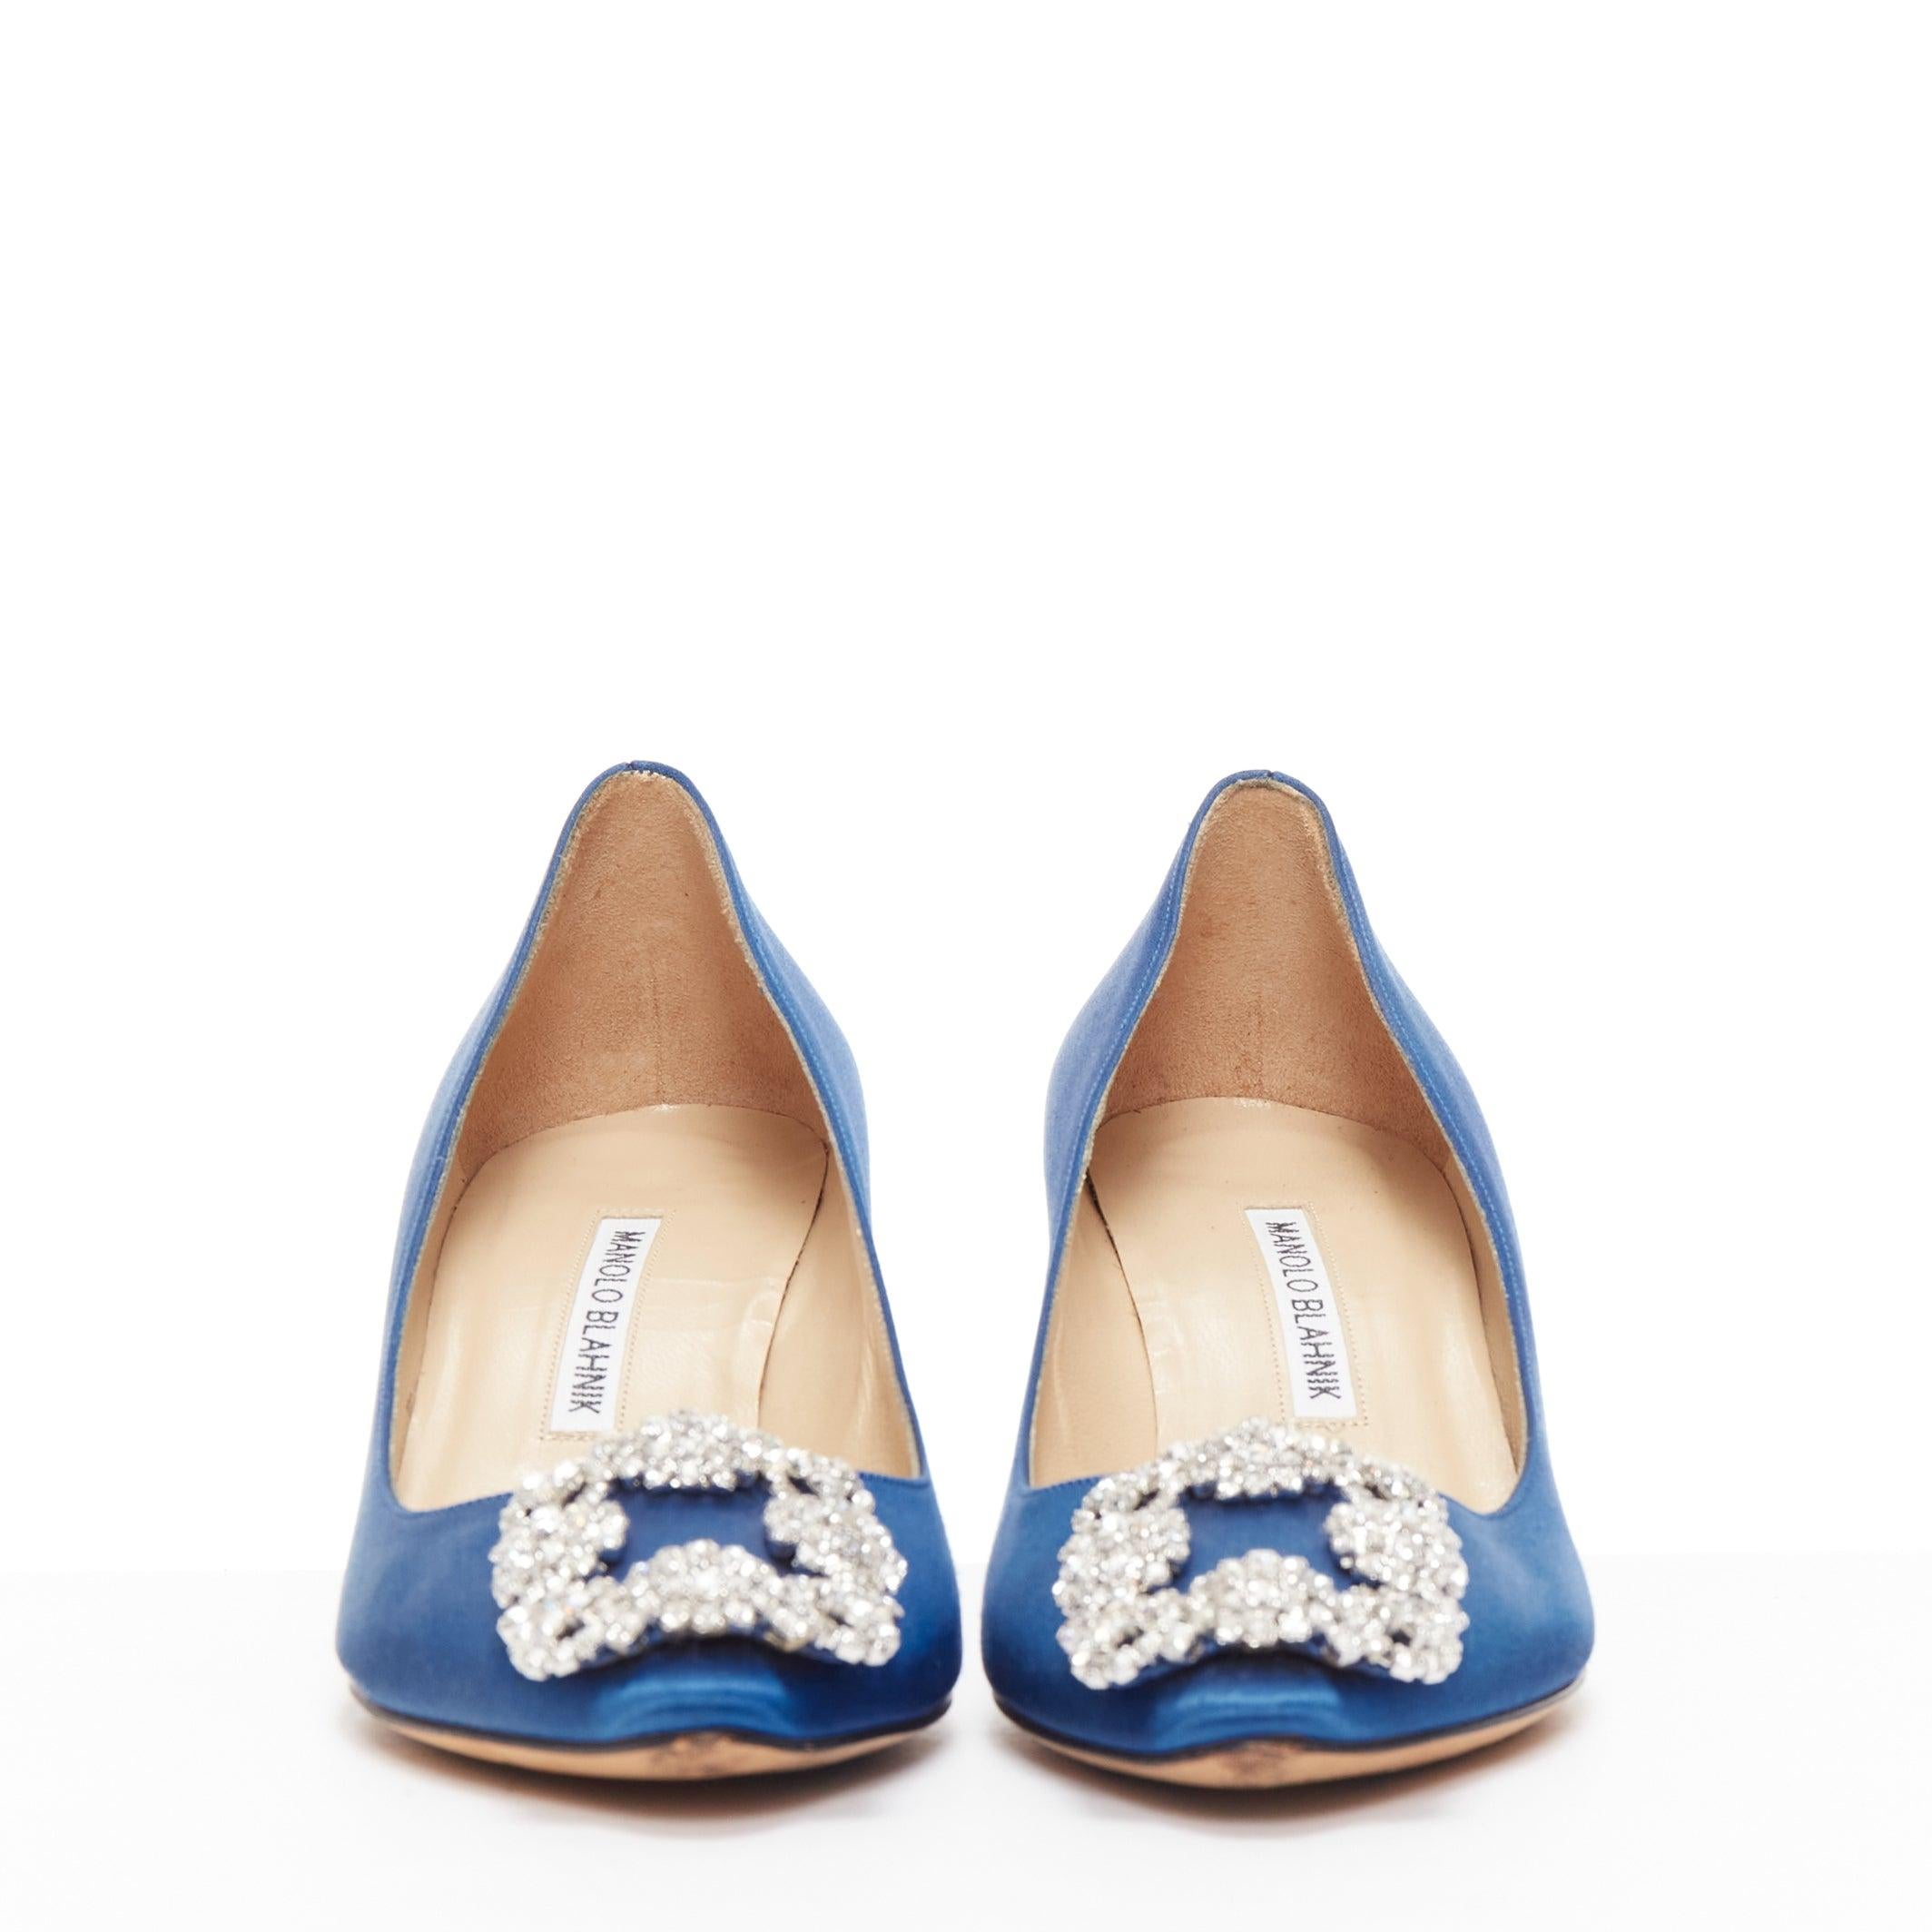 MANOLO BLAHNIK Hangisi 50 blue satin crystal buckle teacup heeled pumps EU36.5 In Good Condition For Sale In Hong Kong, NT